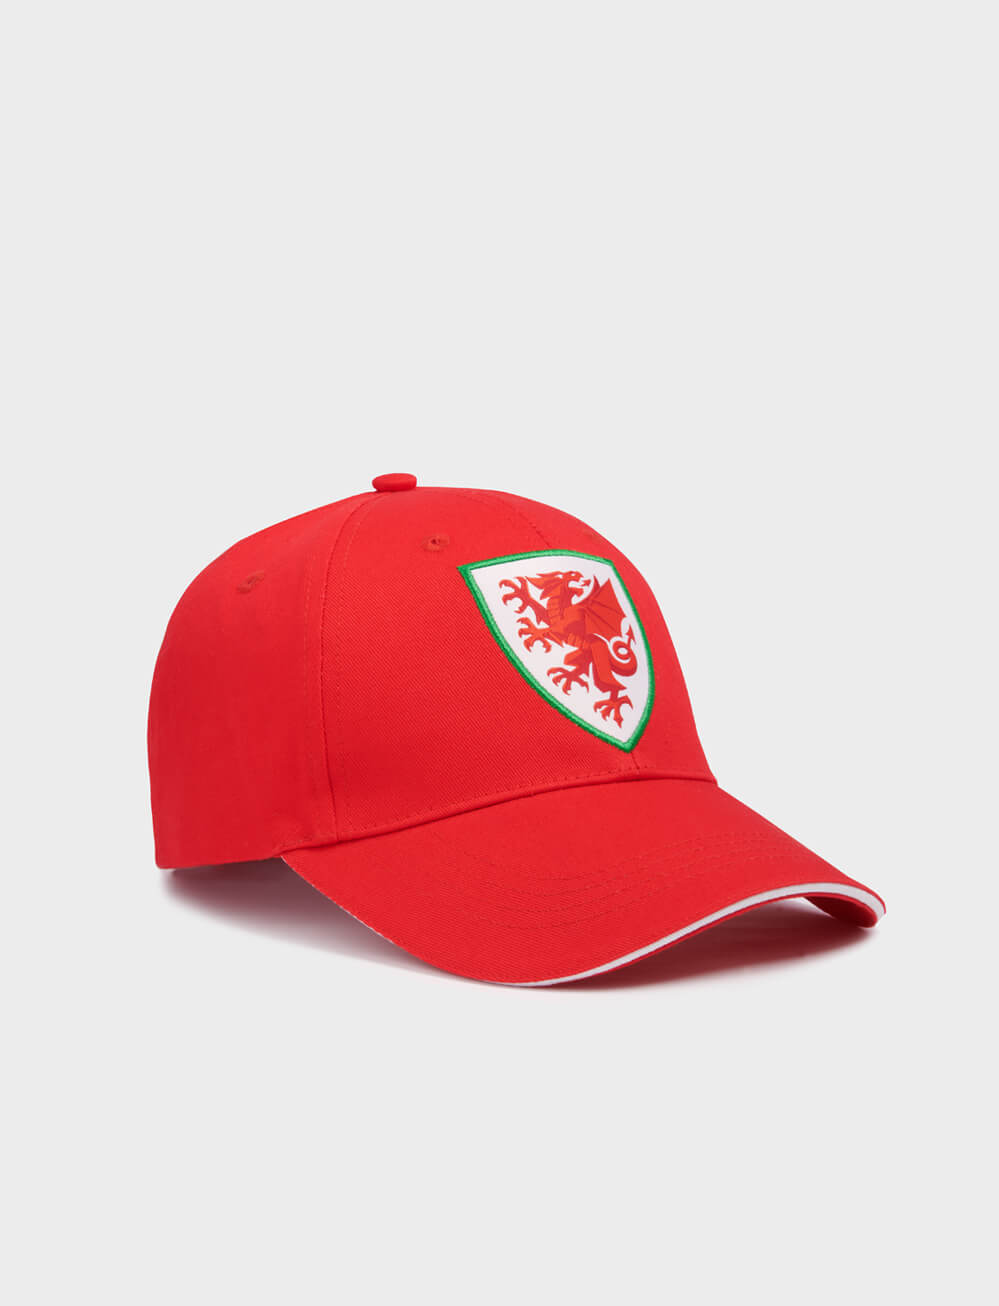 Official Team Wales Kids Cap - Red - The World Football Store